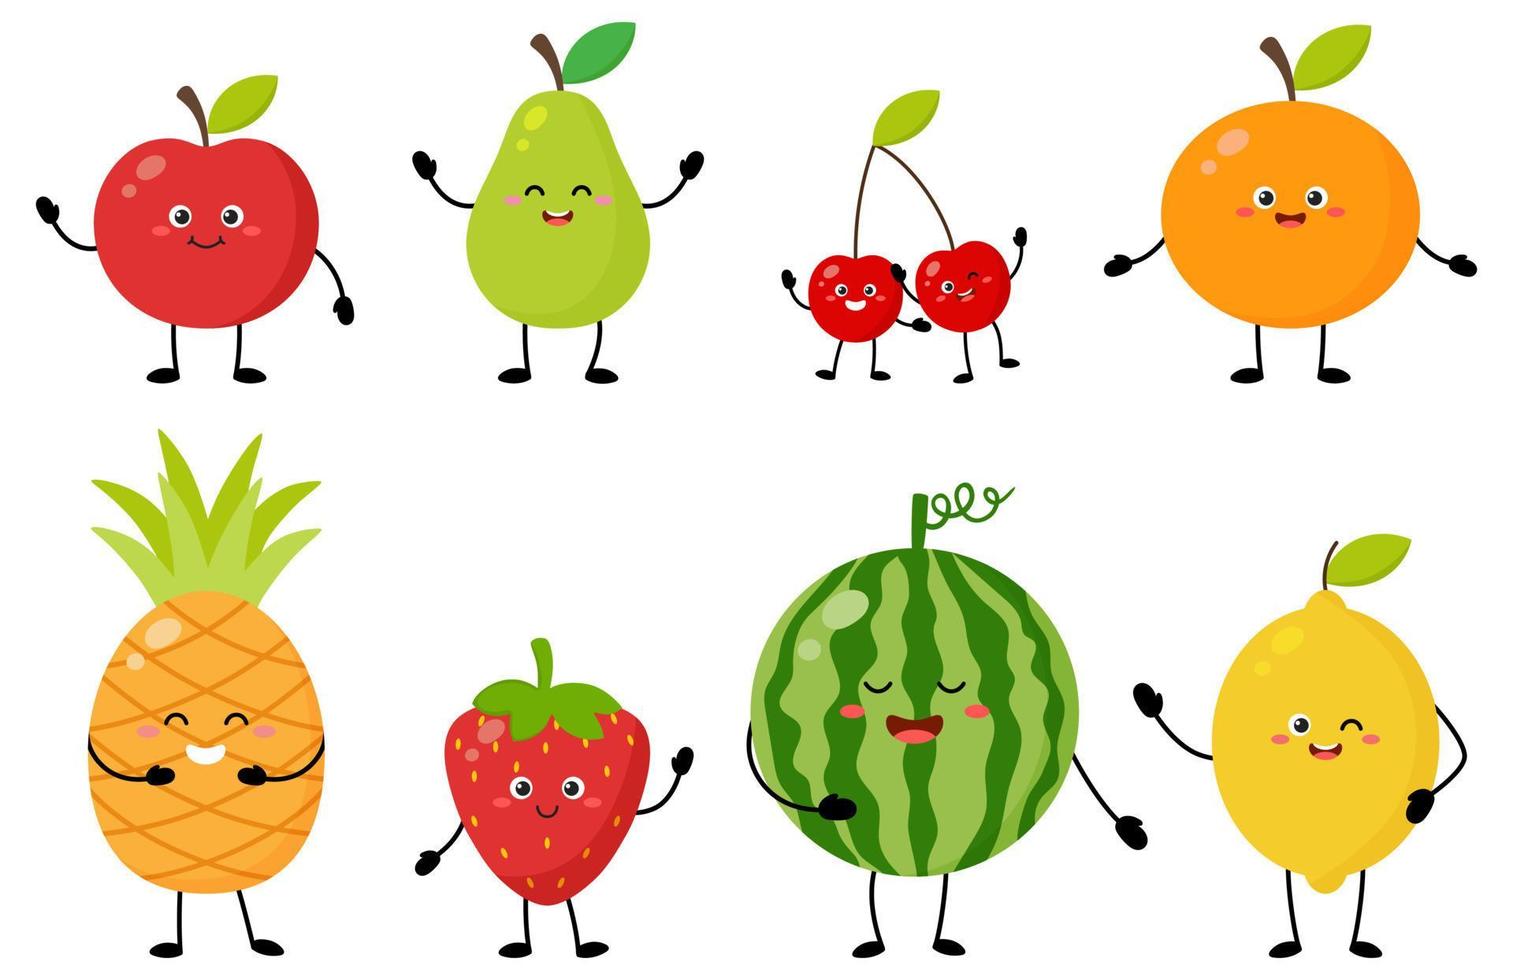 Cartoon set of cheerful cute fruits characters with different poses and emotions. Cute apple, pear, cherry, orange, pineapple, strawberry, watermelon, lemon for kids vector food illustration